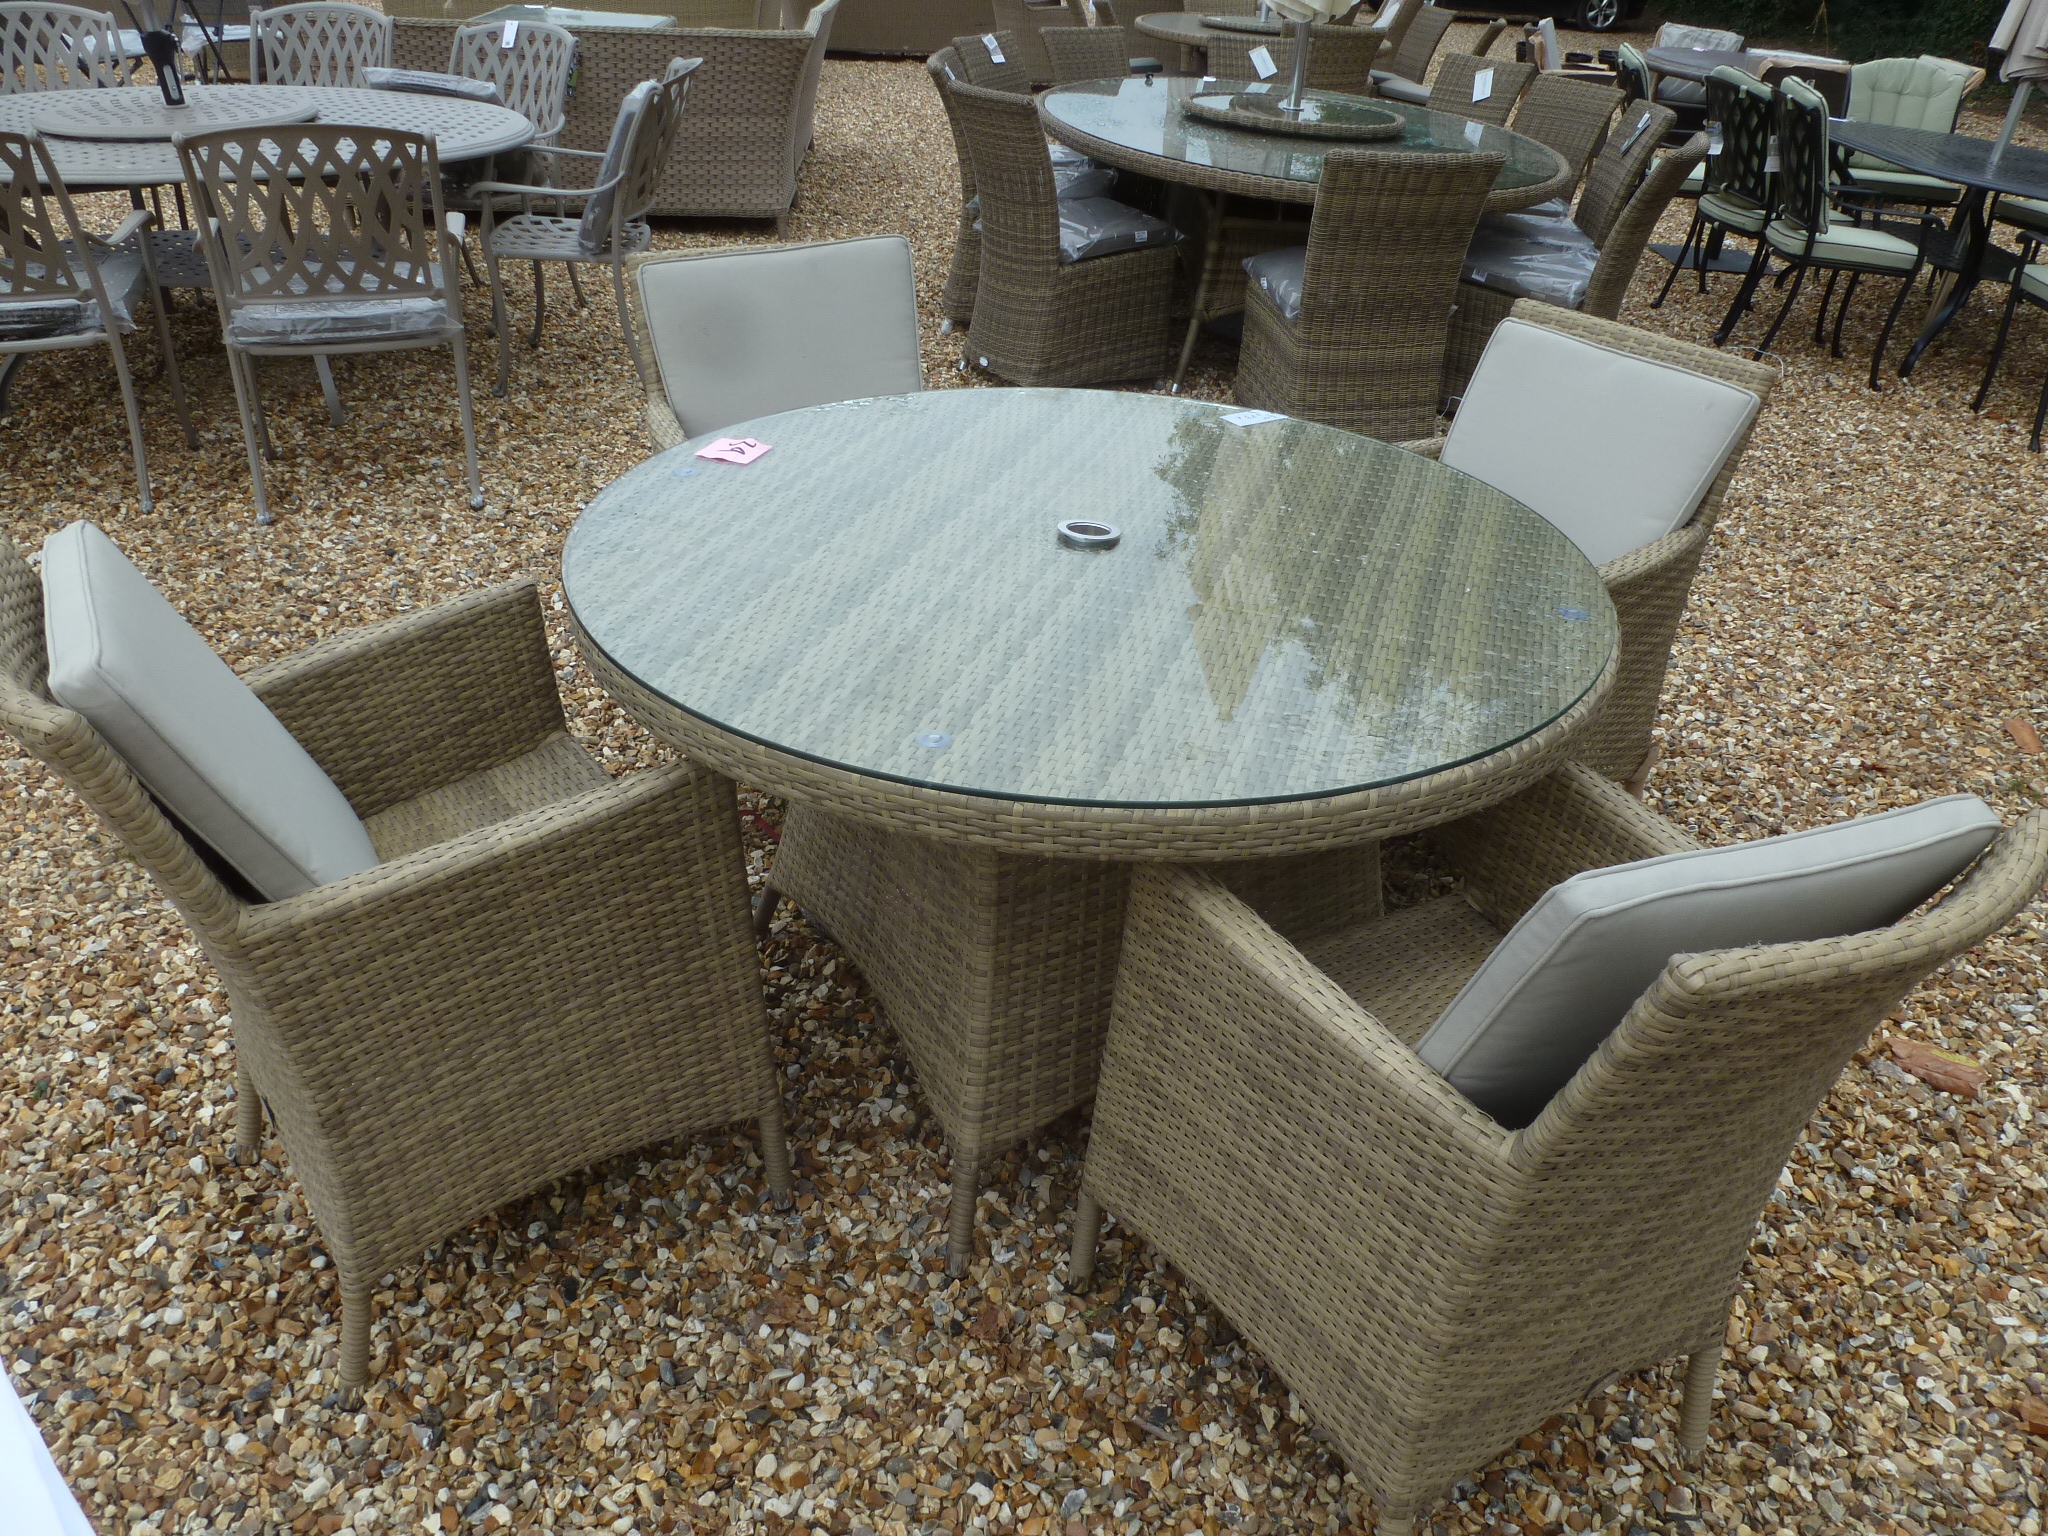 A Bramblecrest Cotswold round table with four armchairs